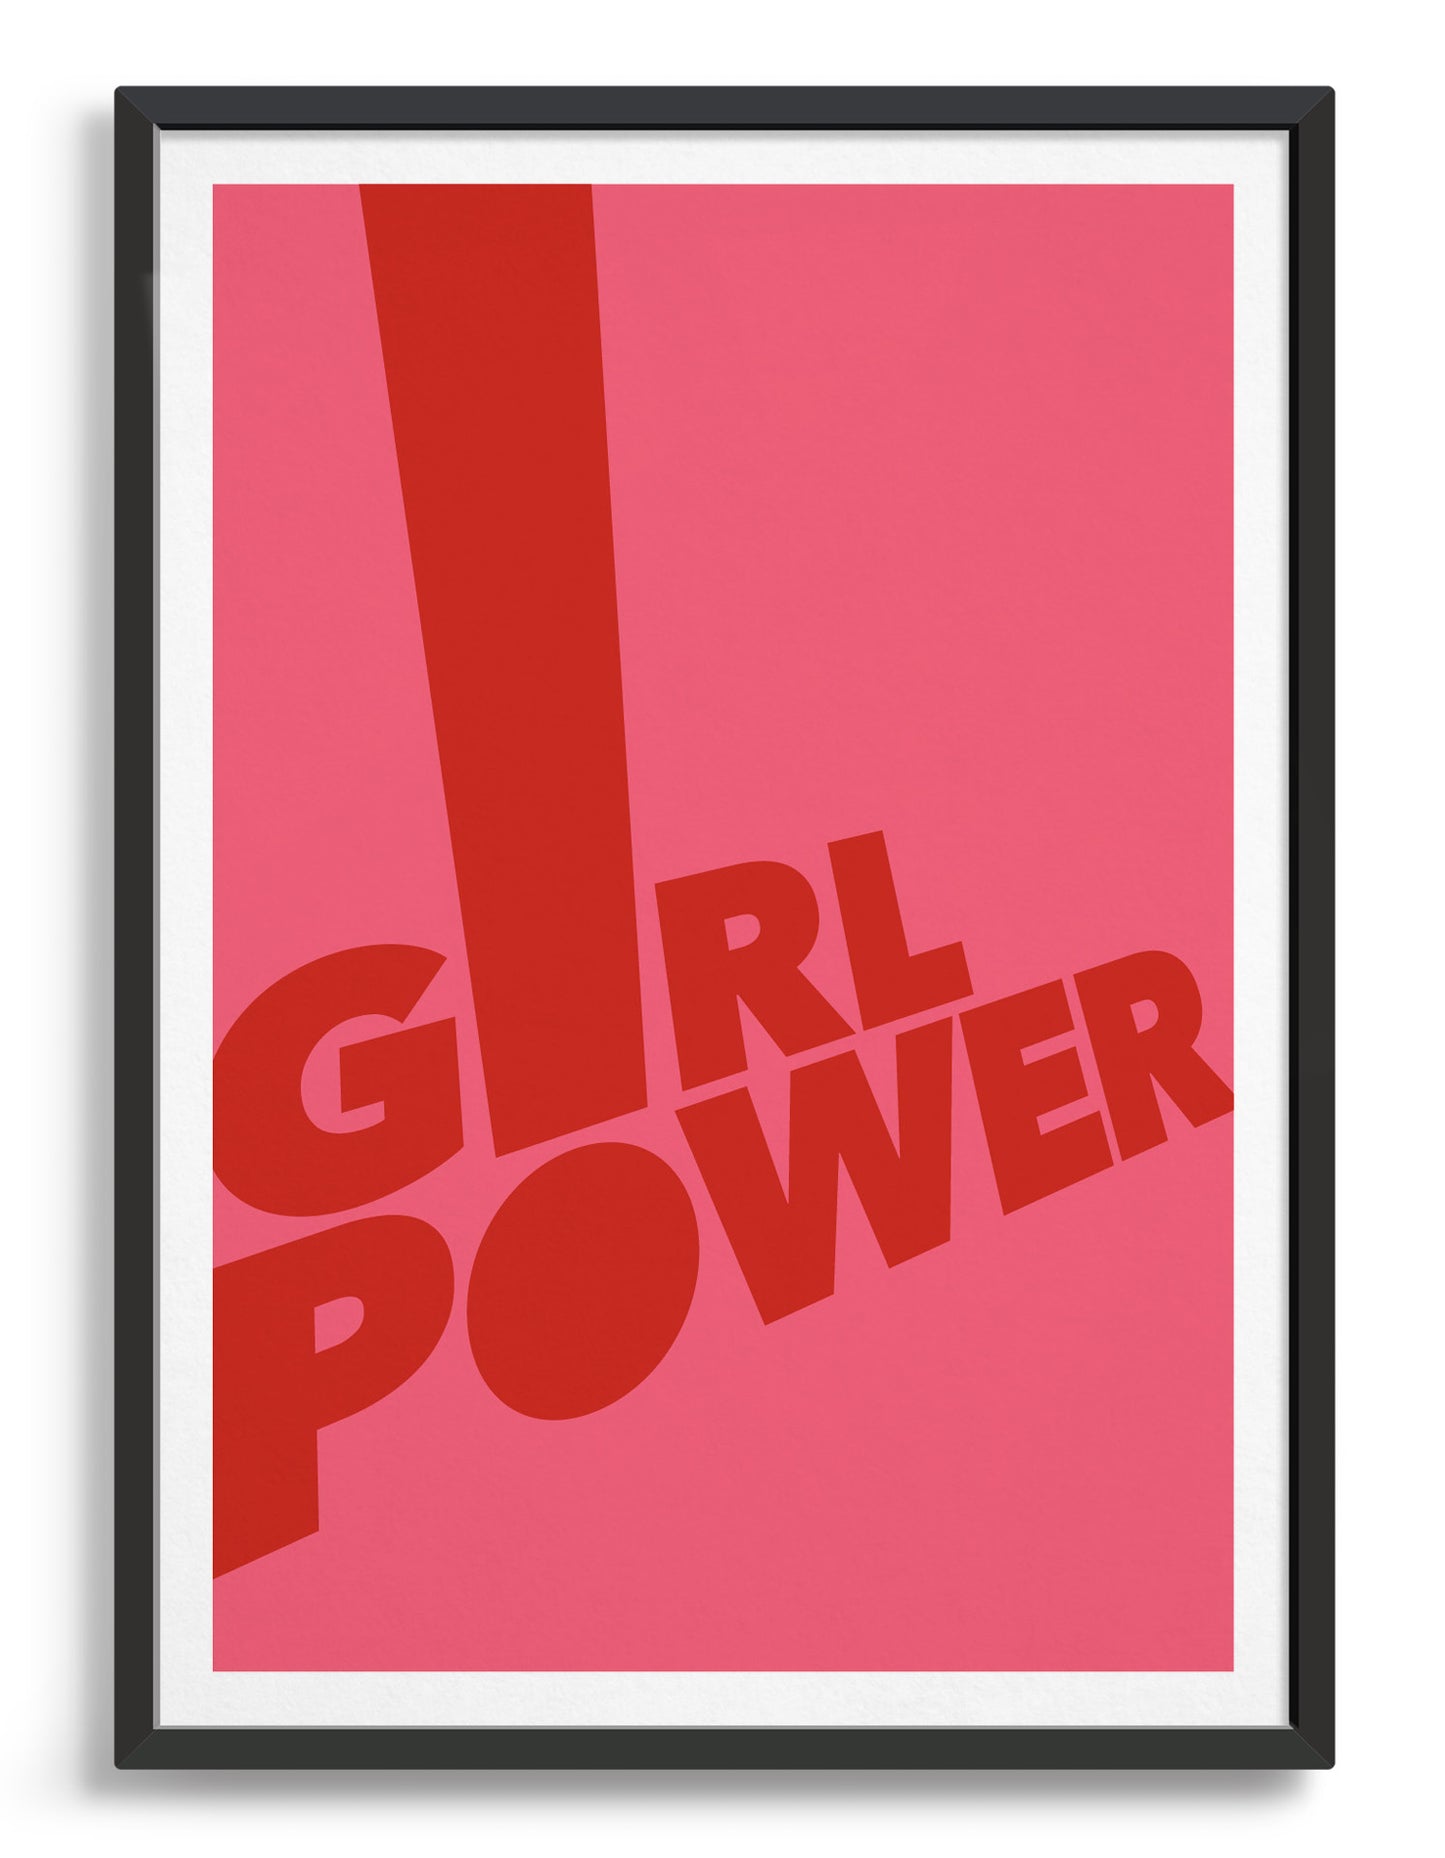 Framed typography art print of the word girl power in red text against a pink background